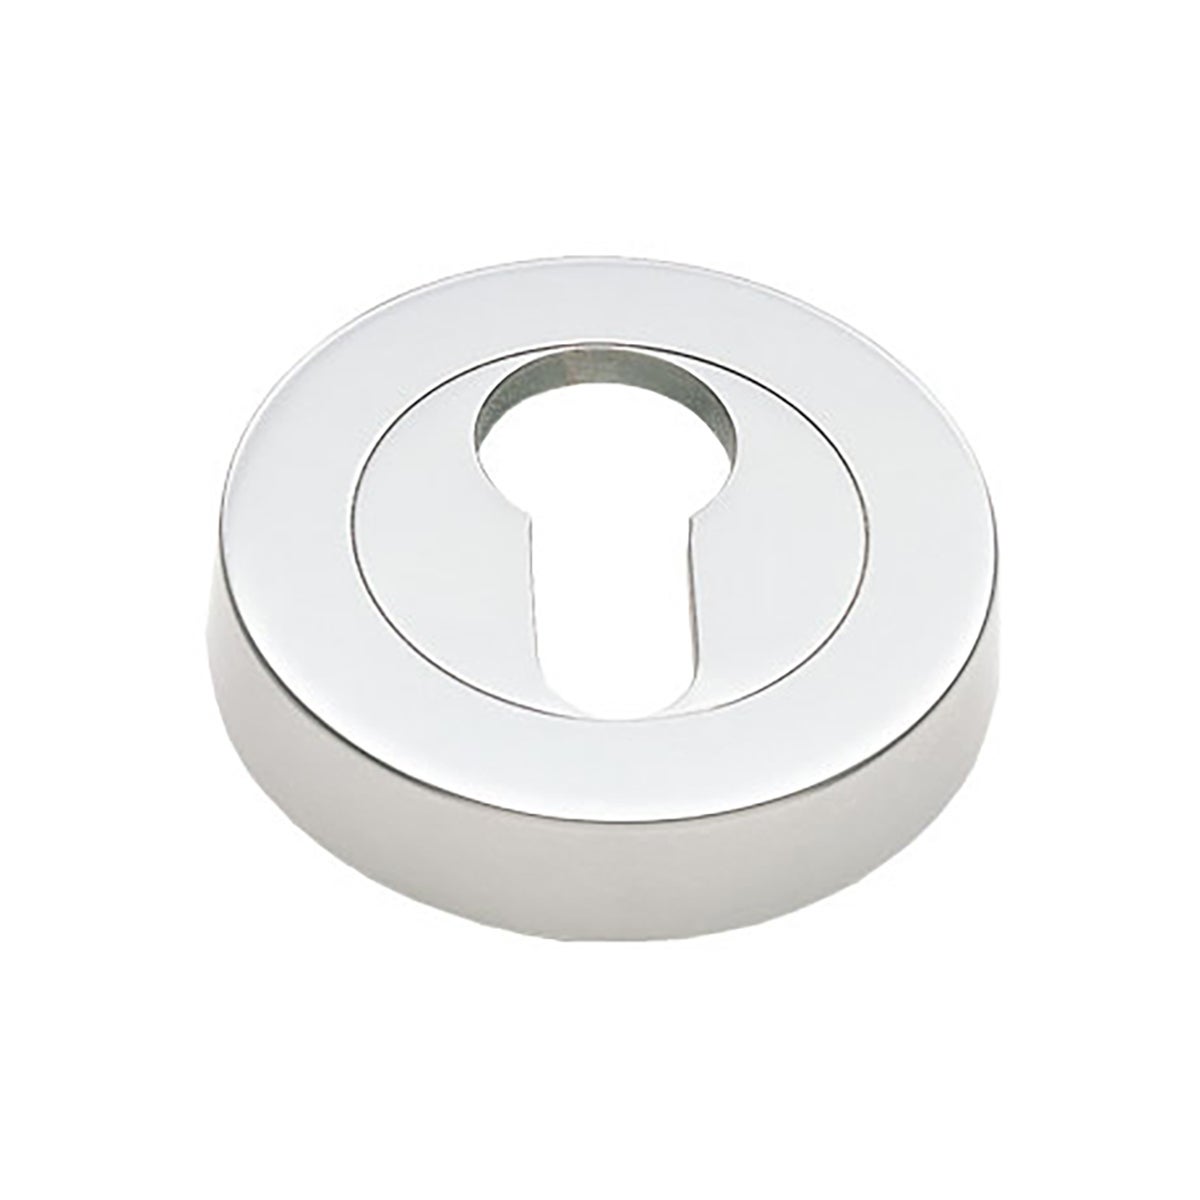 Madinoz Door Euro Escutcheon Round 50mm - Available In Various Finishes